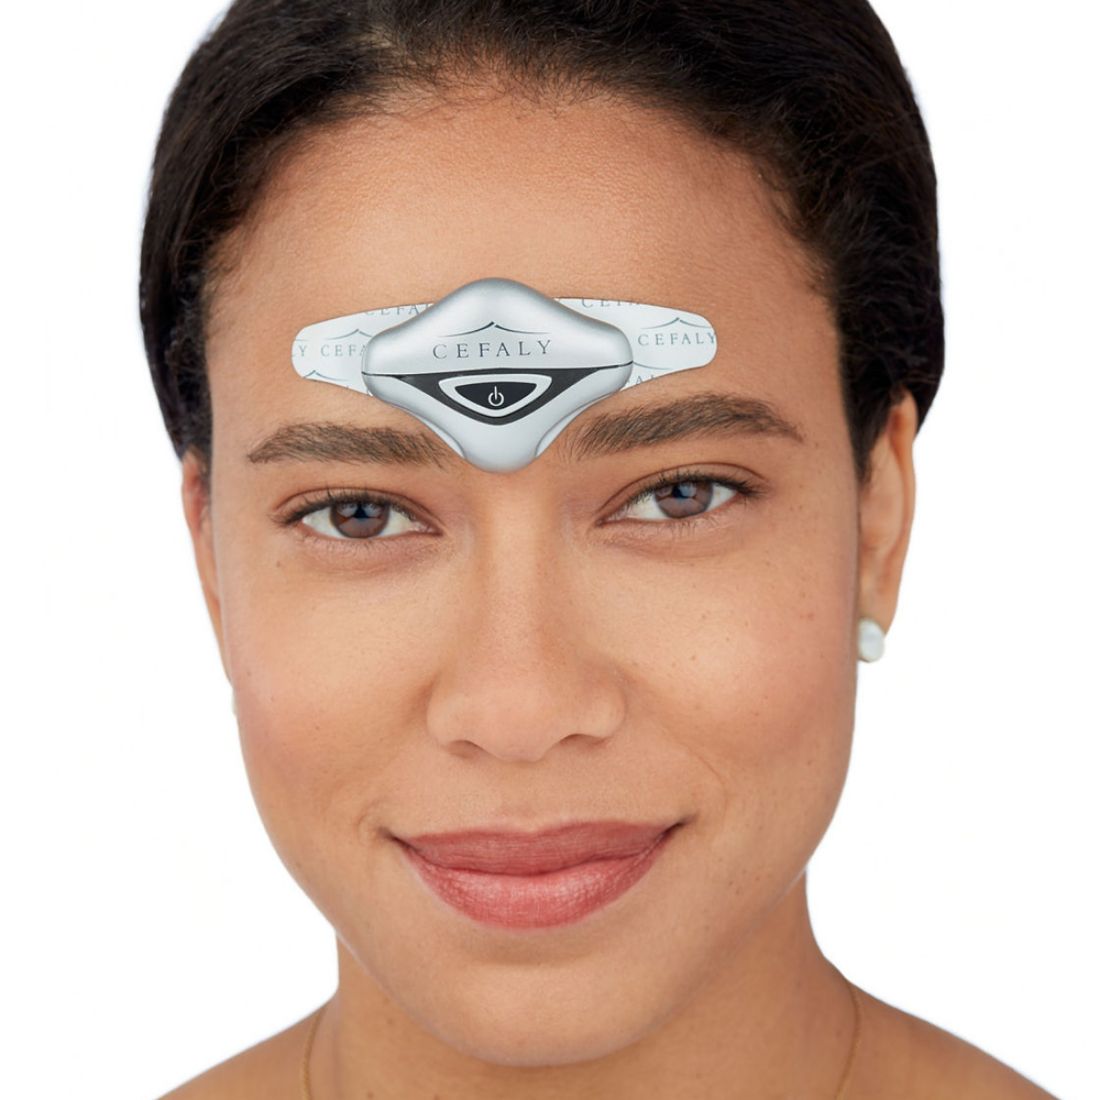  Woman wearing a Cefaly Migraine treatment and prevention device on her forehead  6